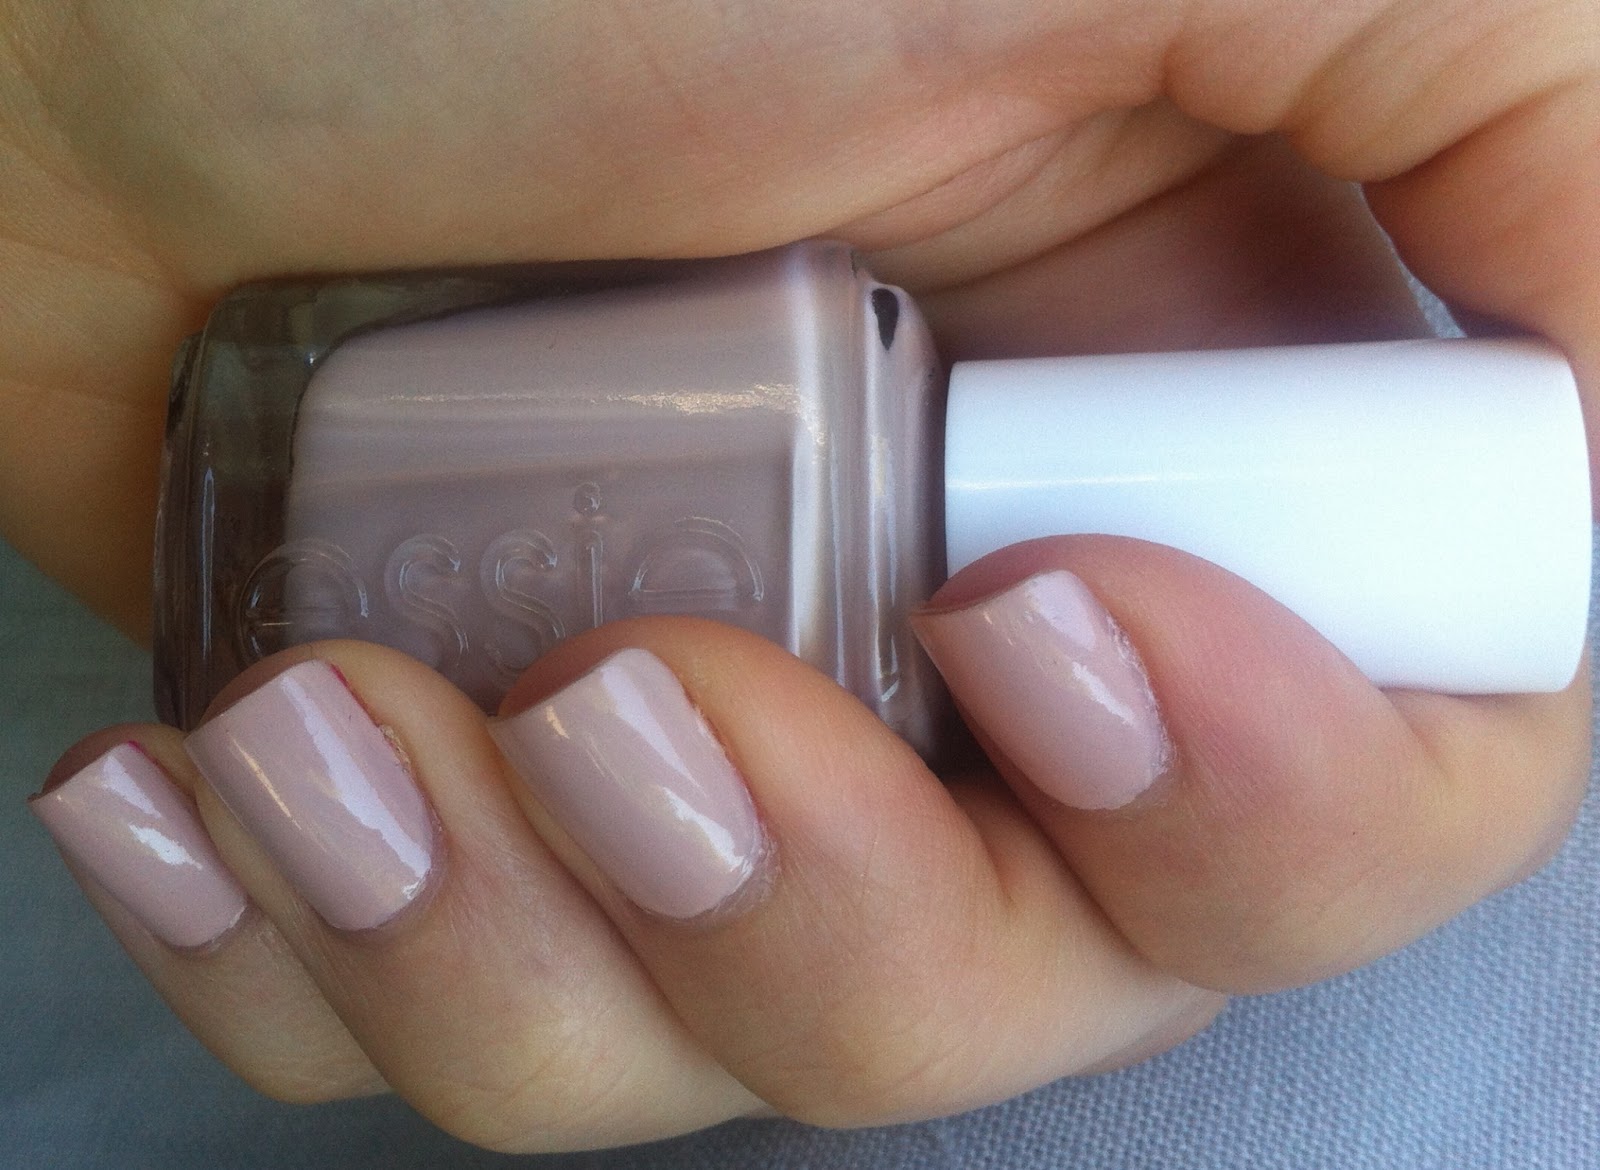 2. Essie "Topless and Barefoot" - wide 5